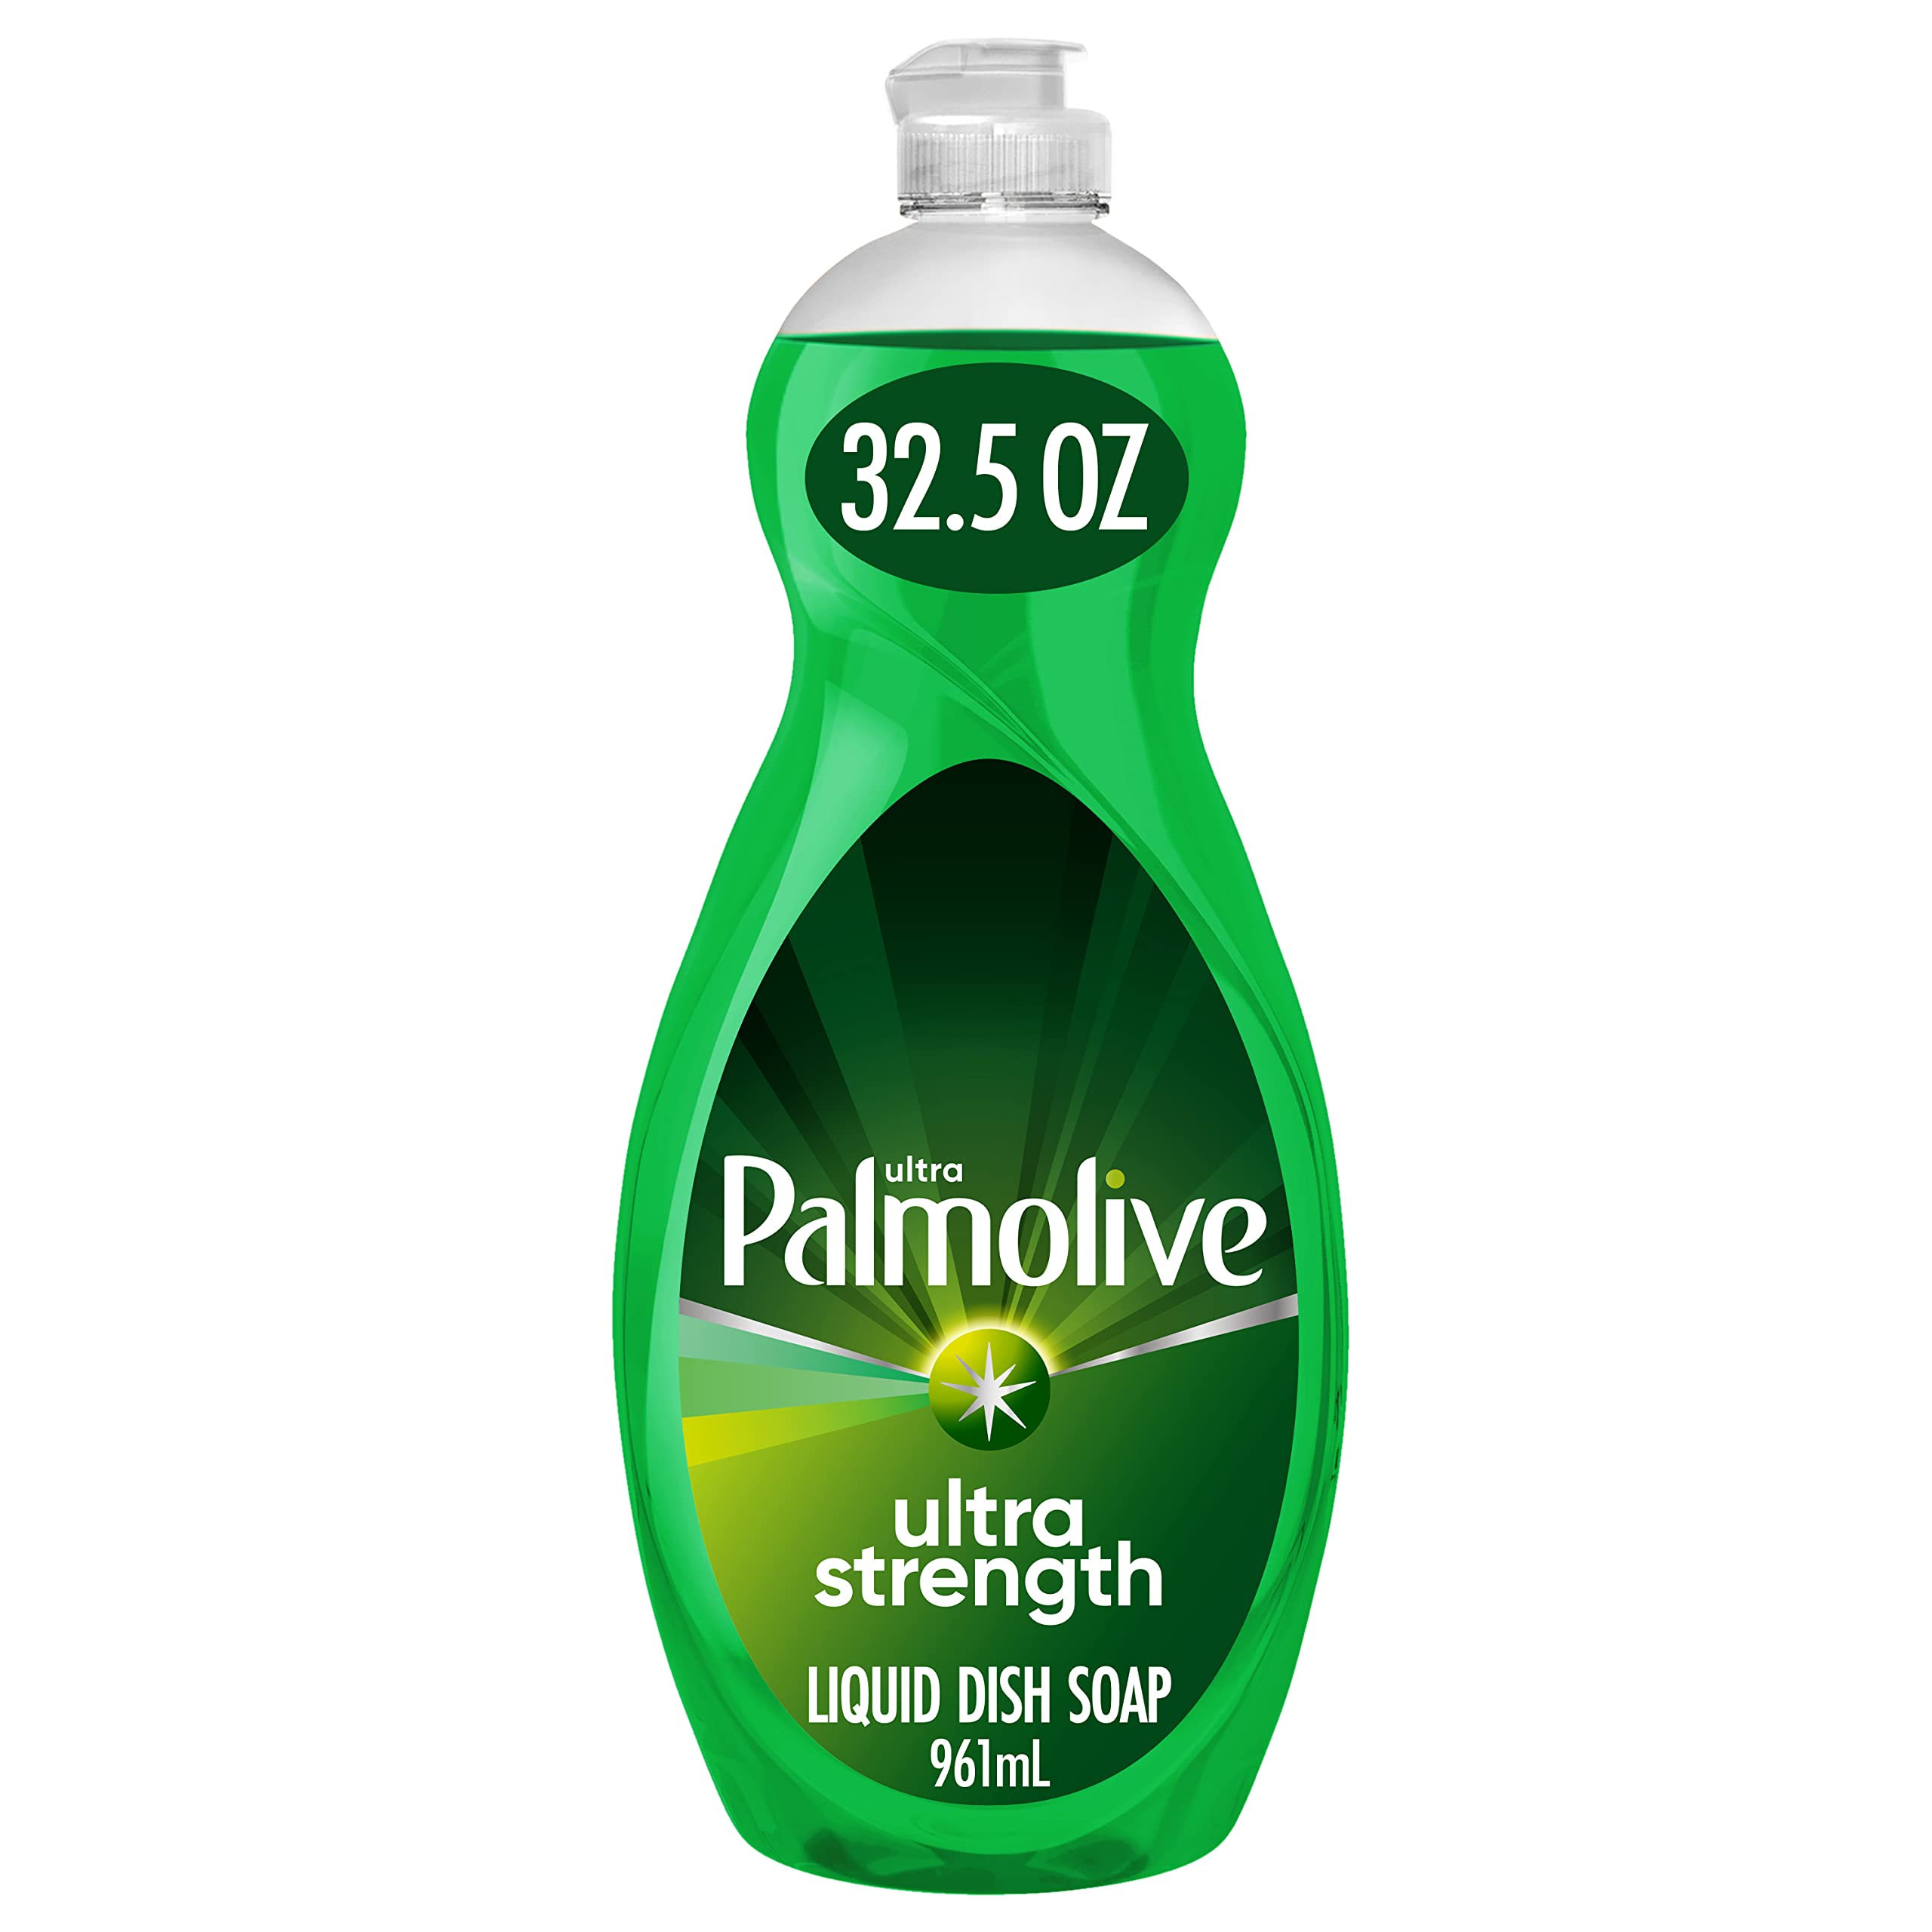 32.5-Oz Palmolive Ultra Strength Liquid Dish Soap (Original Green) 5 for $13.95 ($2.79 each) w/ S&S + Free Shipping w/ Prime or on $35+